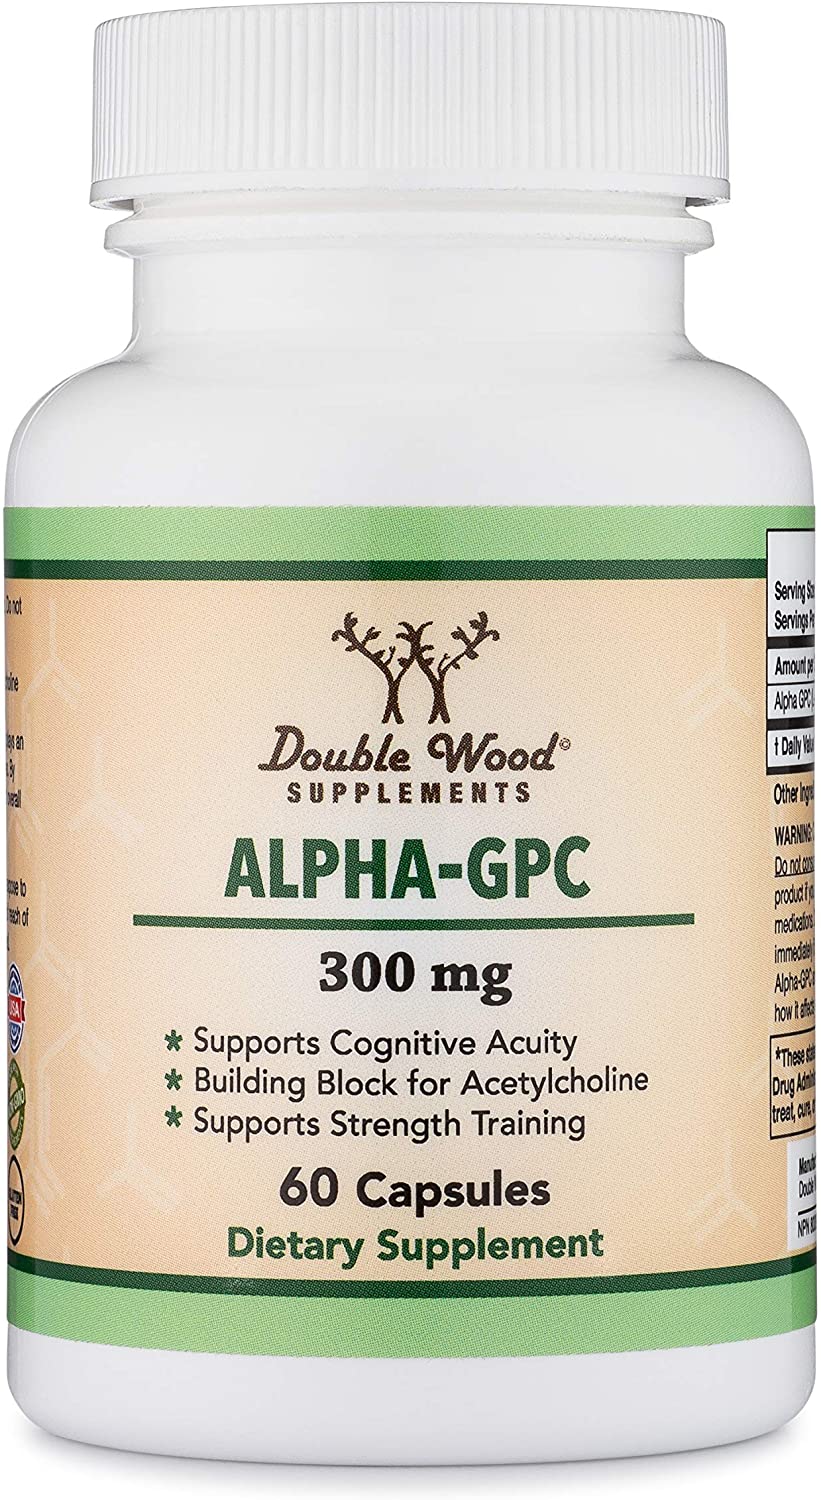 ALPHA GPC by Double Wood Supplements